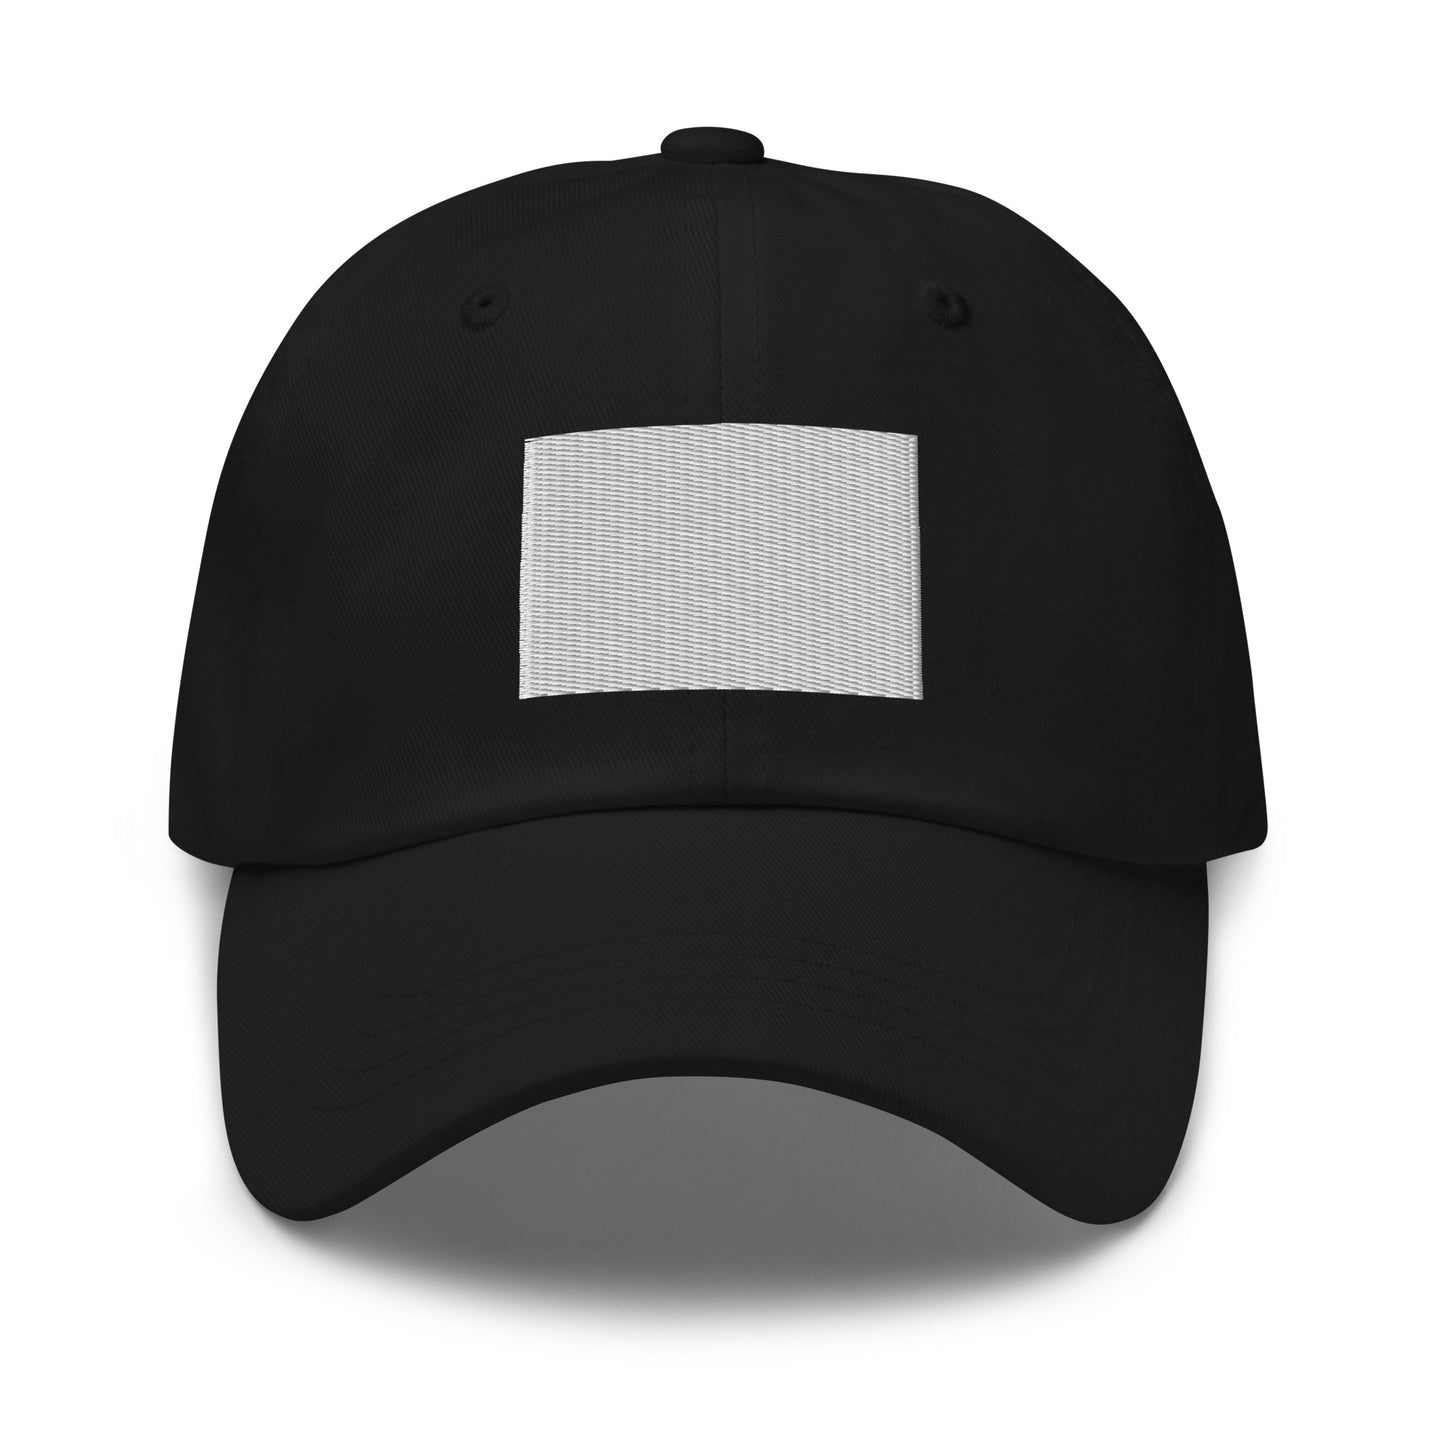 Colorado State Silhouette Dad Hat